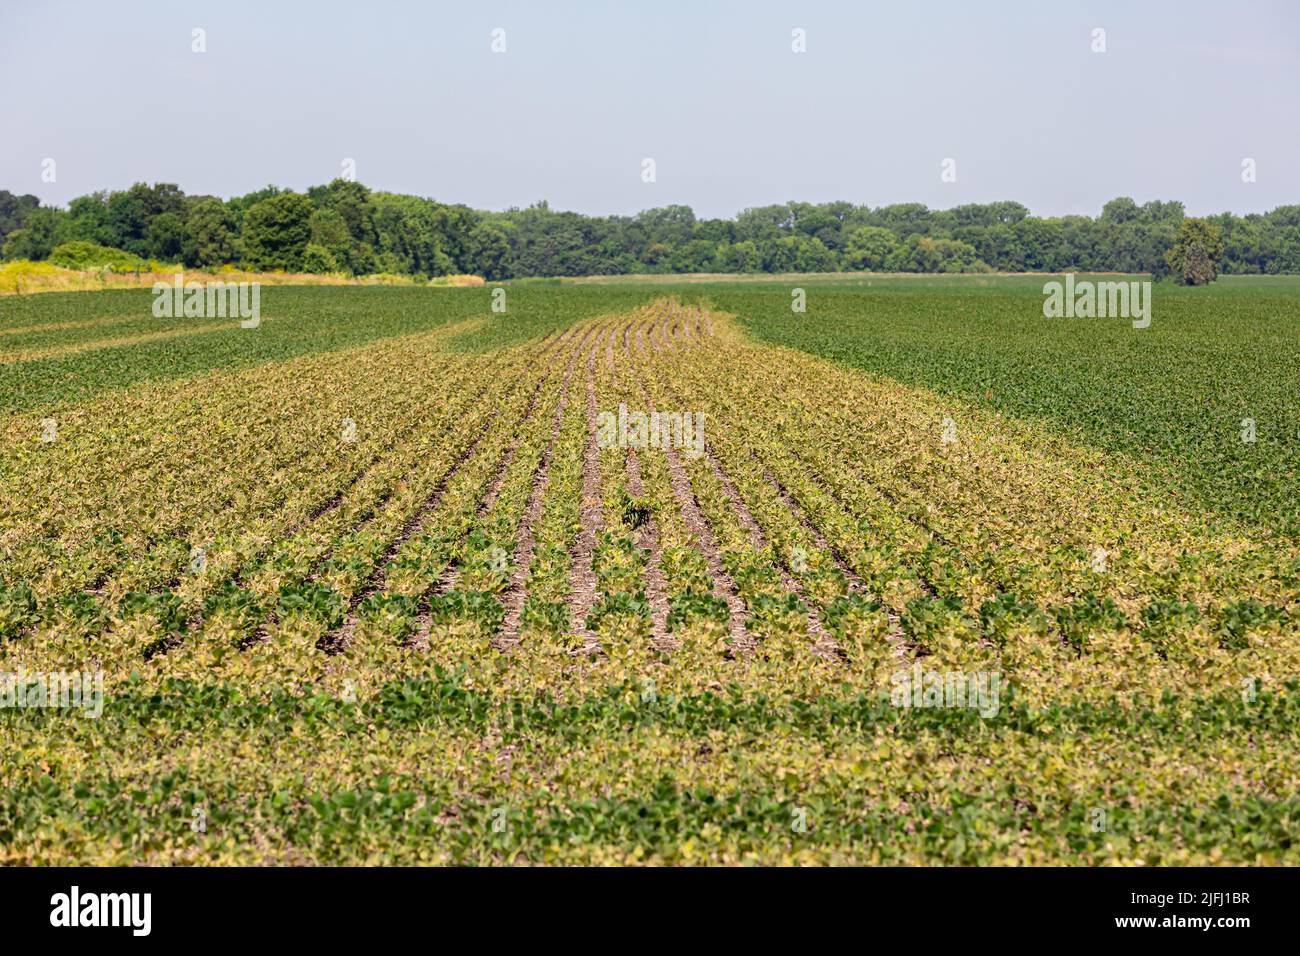 Soybean field turning brown with chemical herbicide damage. Concept of farming, weed control, yield loss. Stock Photo